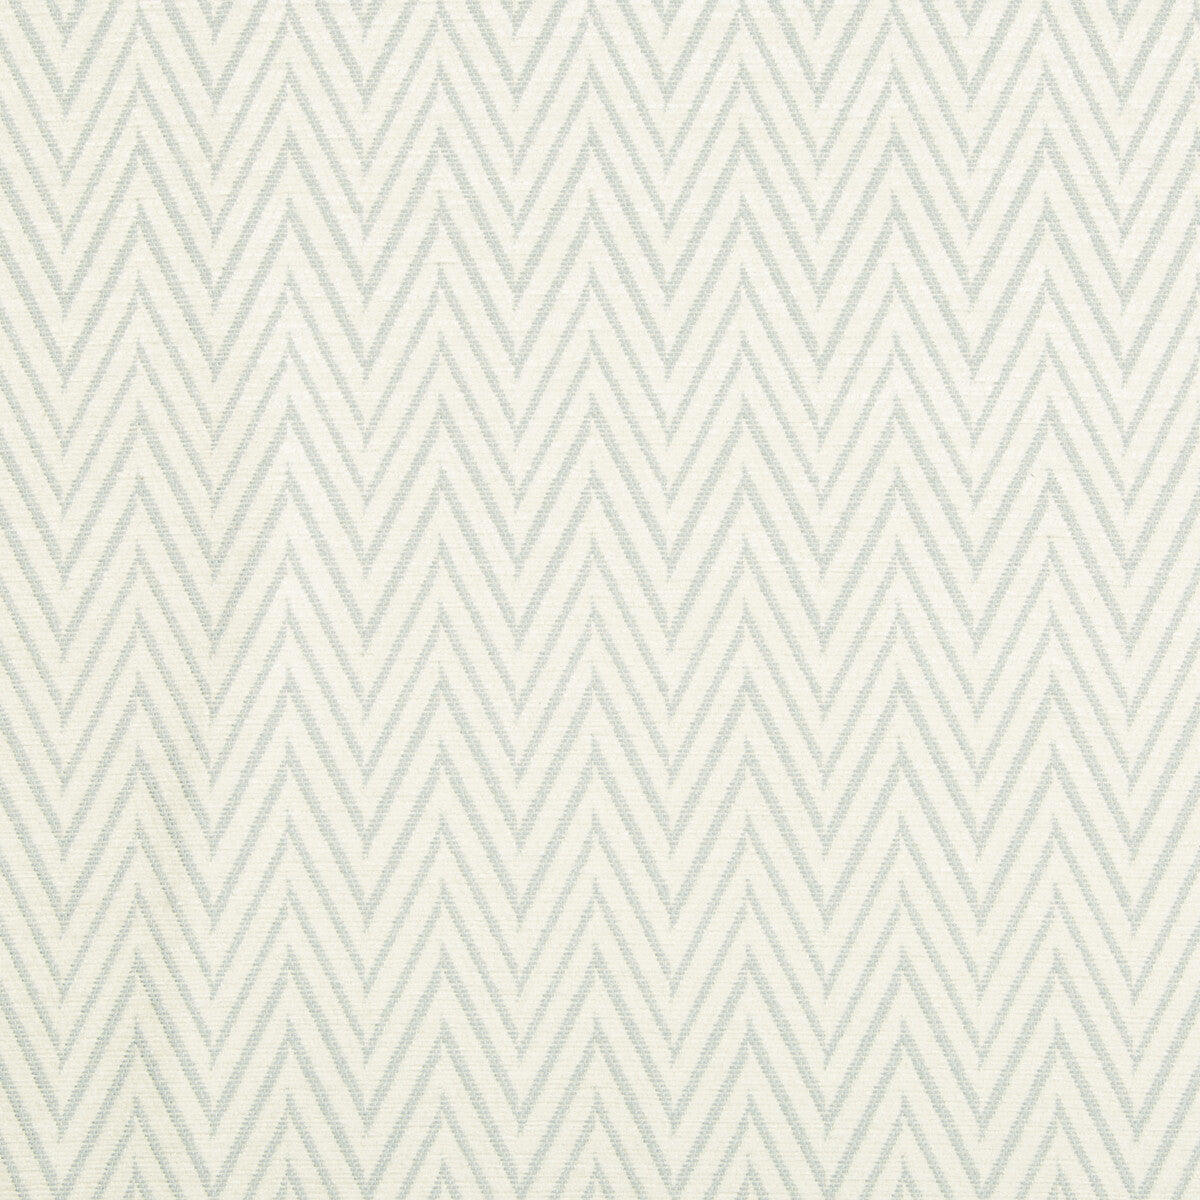 Kravet Design fabric in 34690-15 color - pattern 34690.15.0 - by Kravet Design in the Crypton Home collection